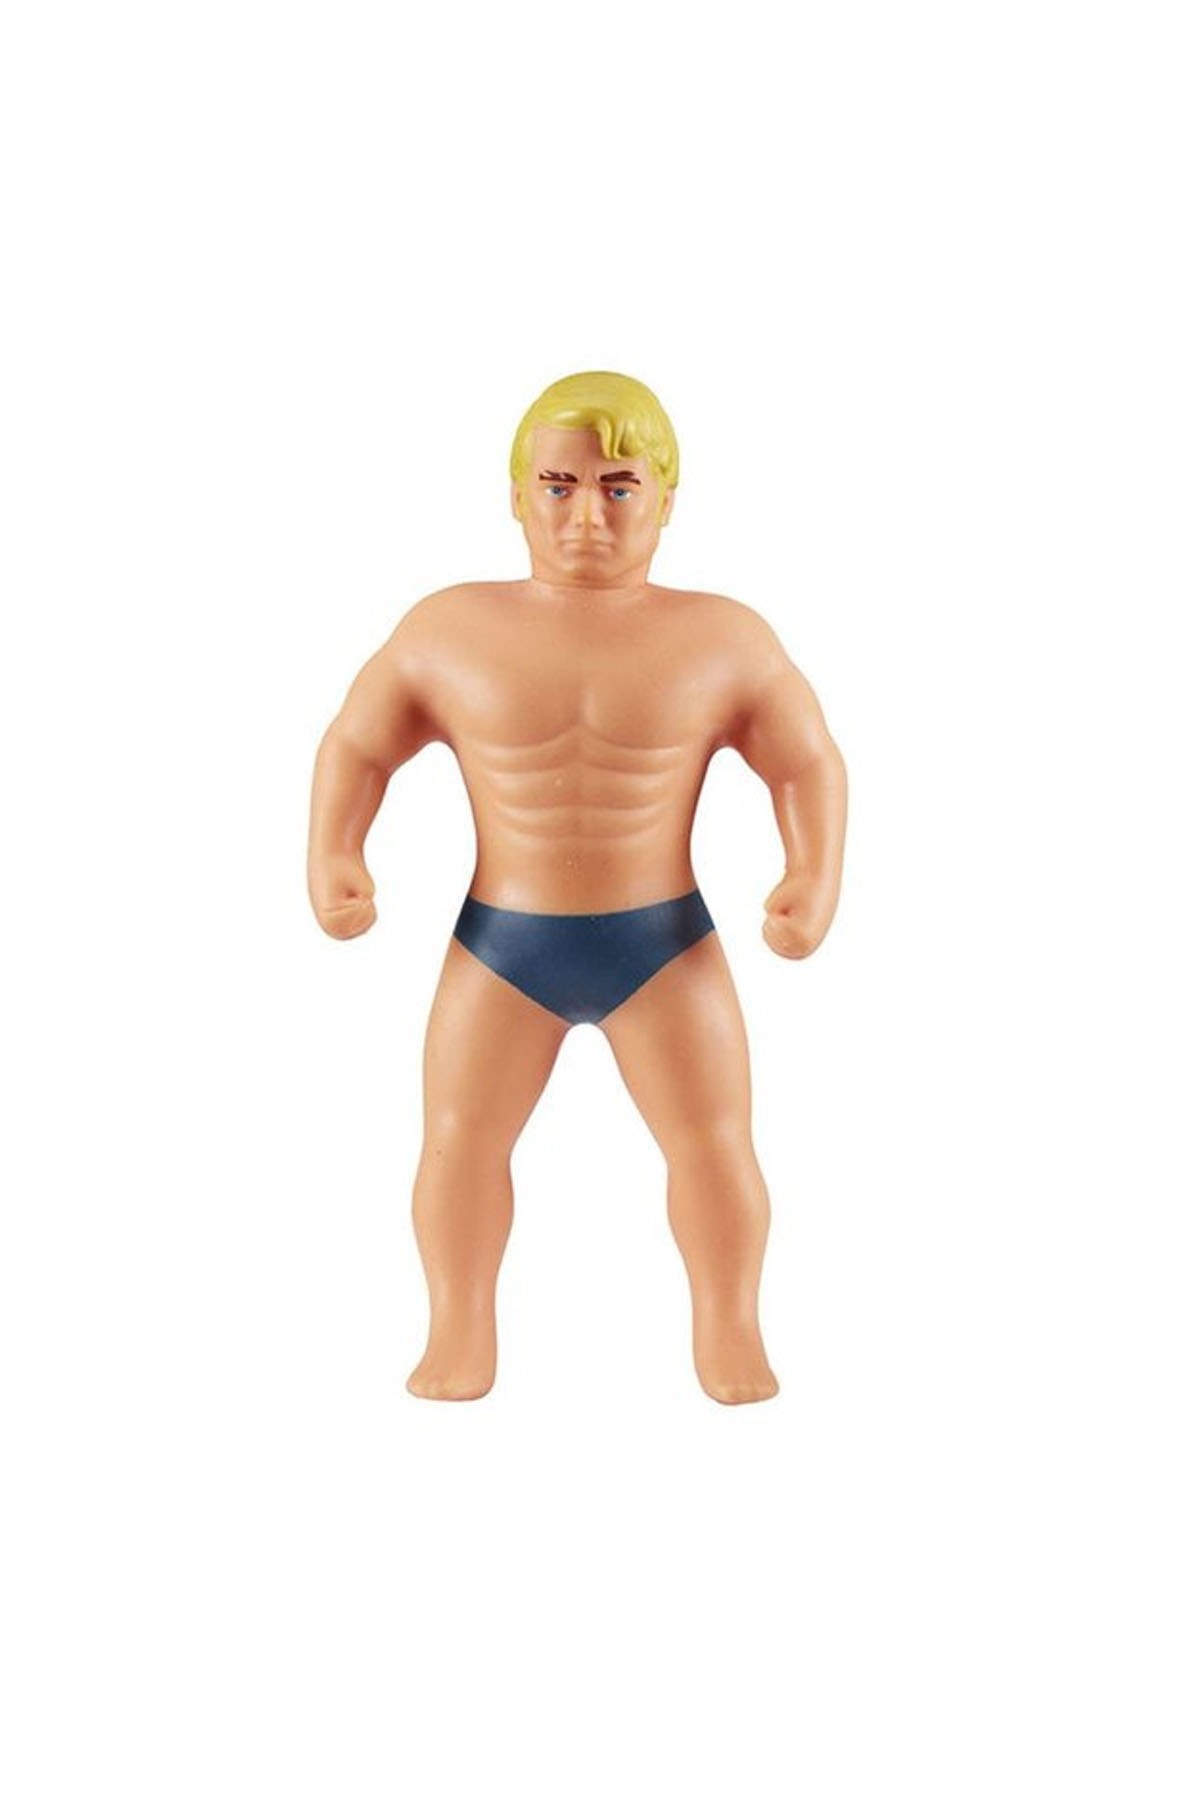 Stretch Armstrong Mini Stretch Armstrong 07484